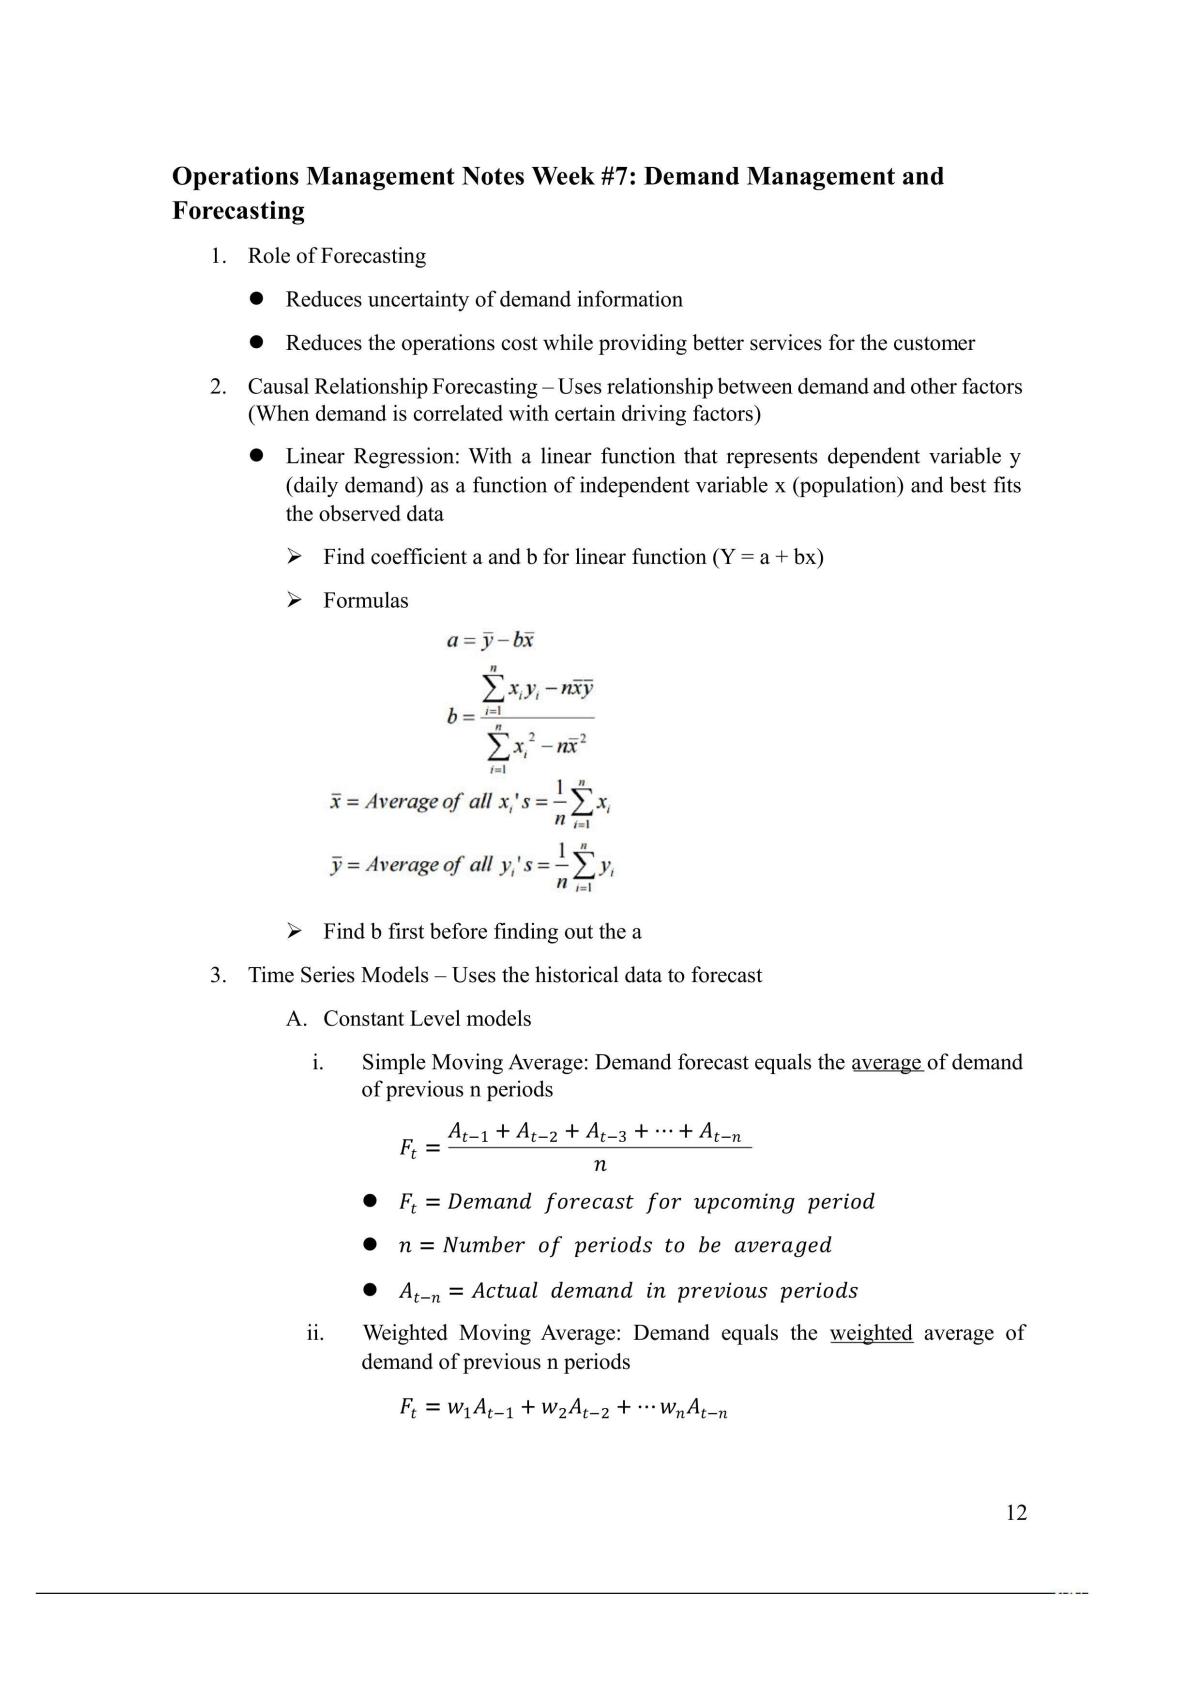 Operations Management Notes - Page 12